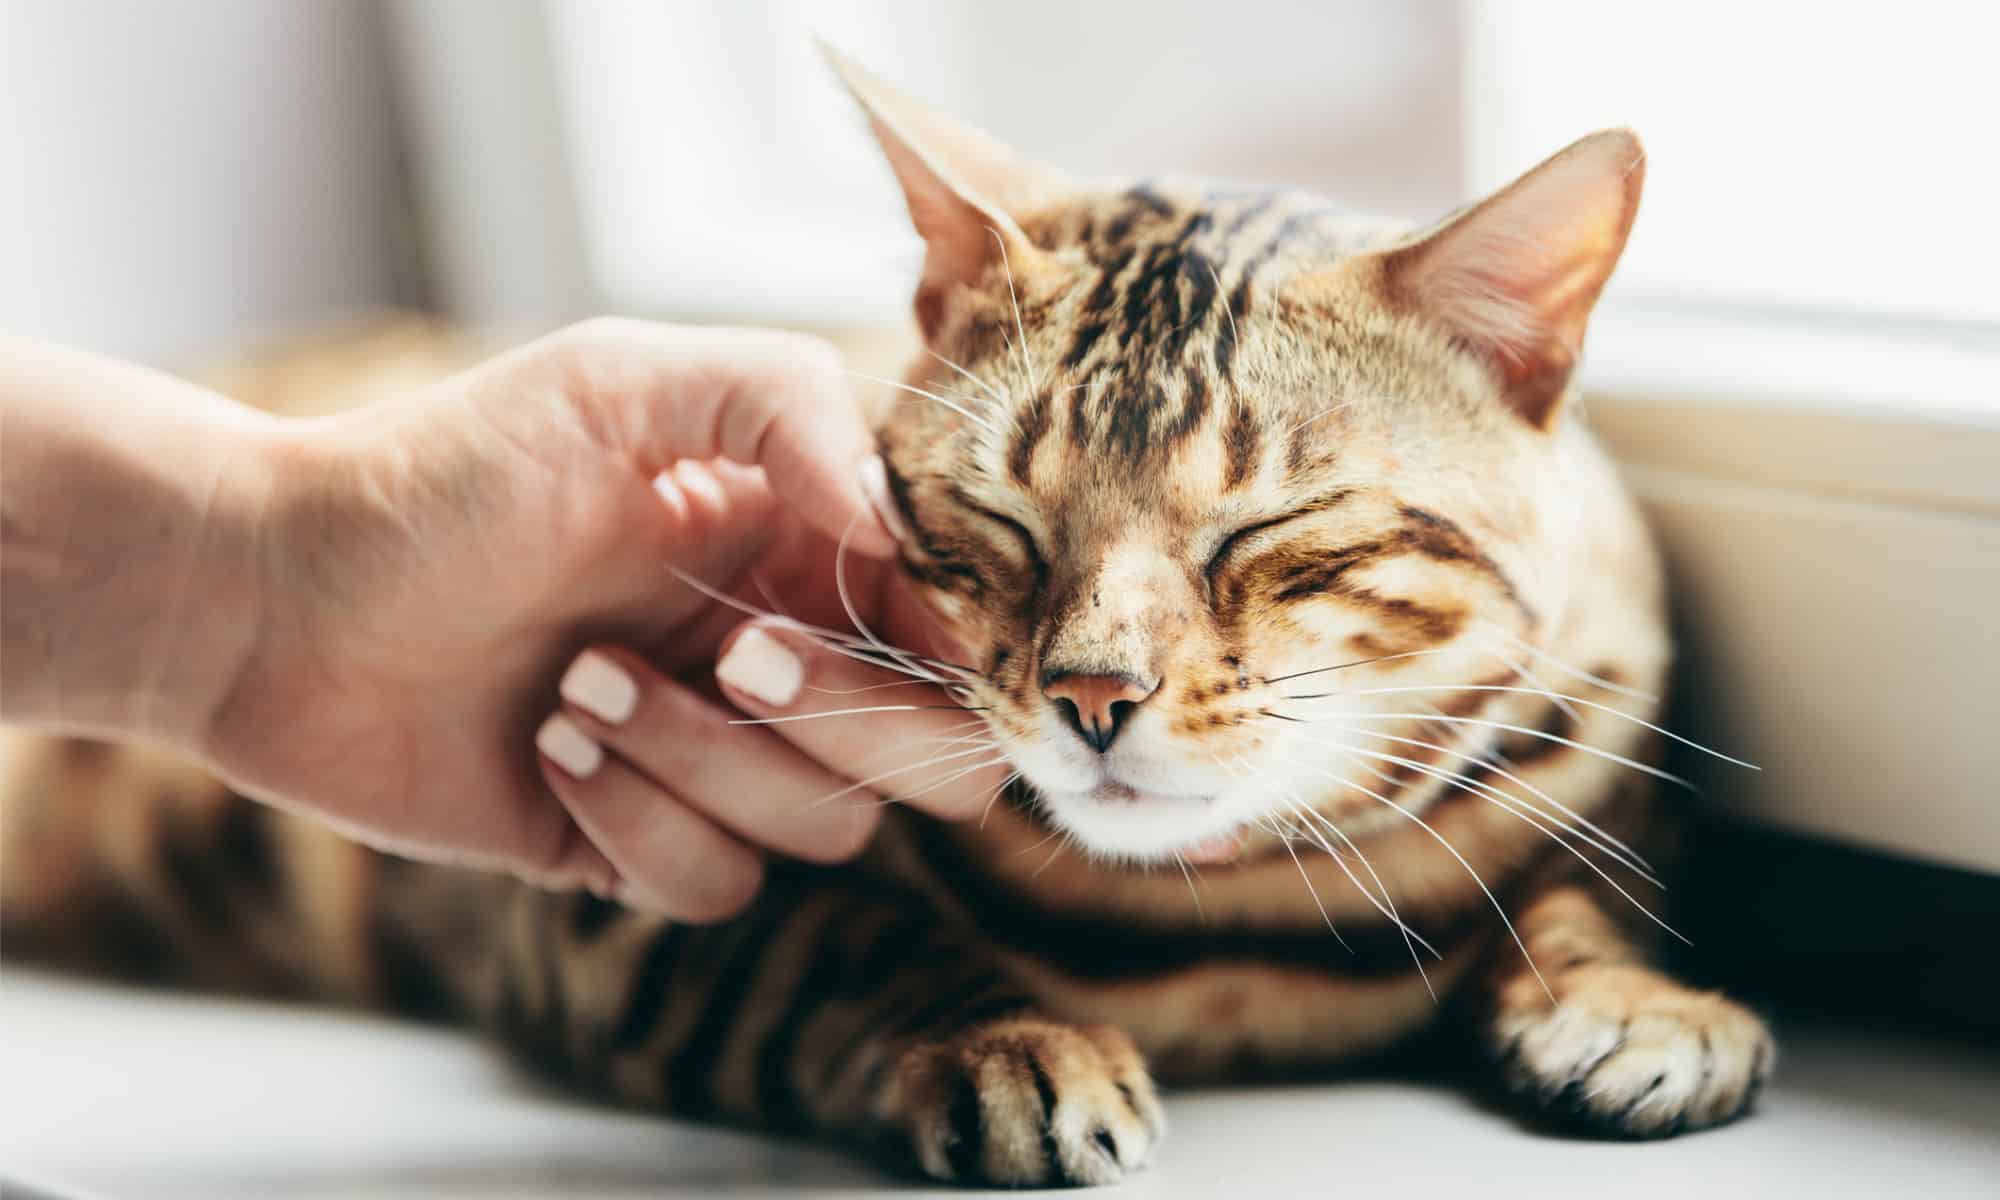 <p>Did you know that a cat purring doesn’t always indicate happiness? Cats also purr when they’re afraid or injured.</p>    <p>Cats’ purrs have soothing qualities for both cats and humans. On top of this, they actually operate at frequencies that can <a href="https://pubs.aip.org/asa/jasa/article/110/5_Supplement/2666/550913/The-felid-purr-A-healing-mechanism">heal bones</a> and other injuries.</p>    <p>They’re also incredibly intuitive animals, similar to dogs. If you’re injured or sick, your cat might stay nearer and is likely to purr more in an attempt to provide comfort.</p>